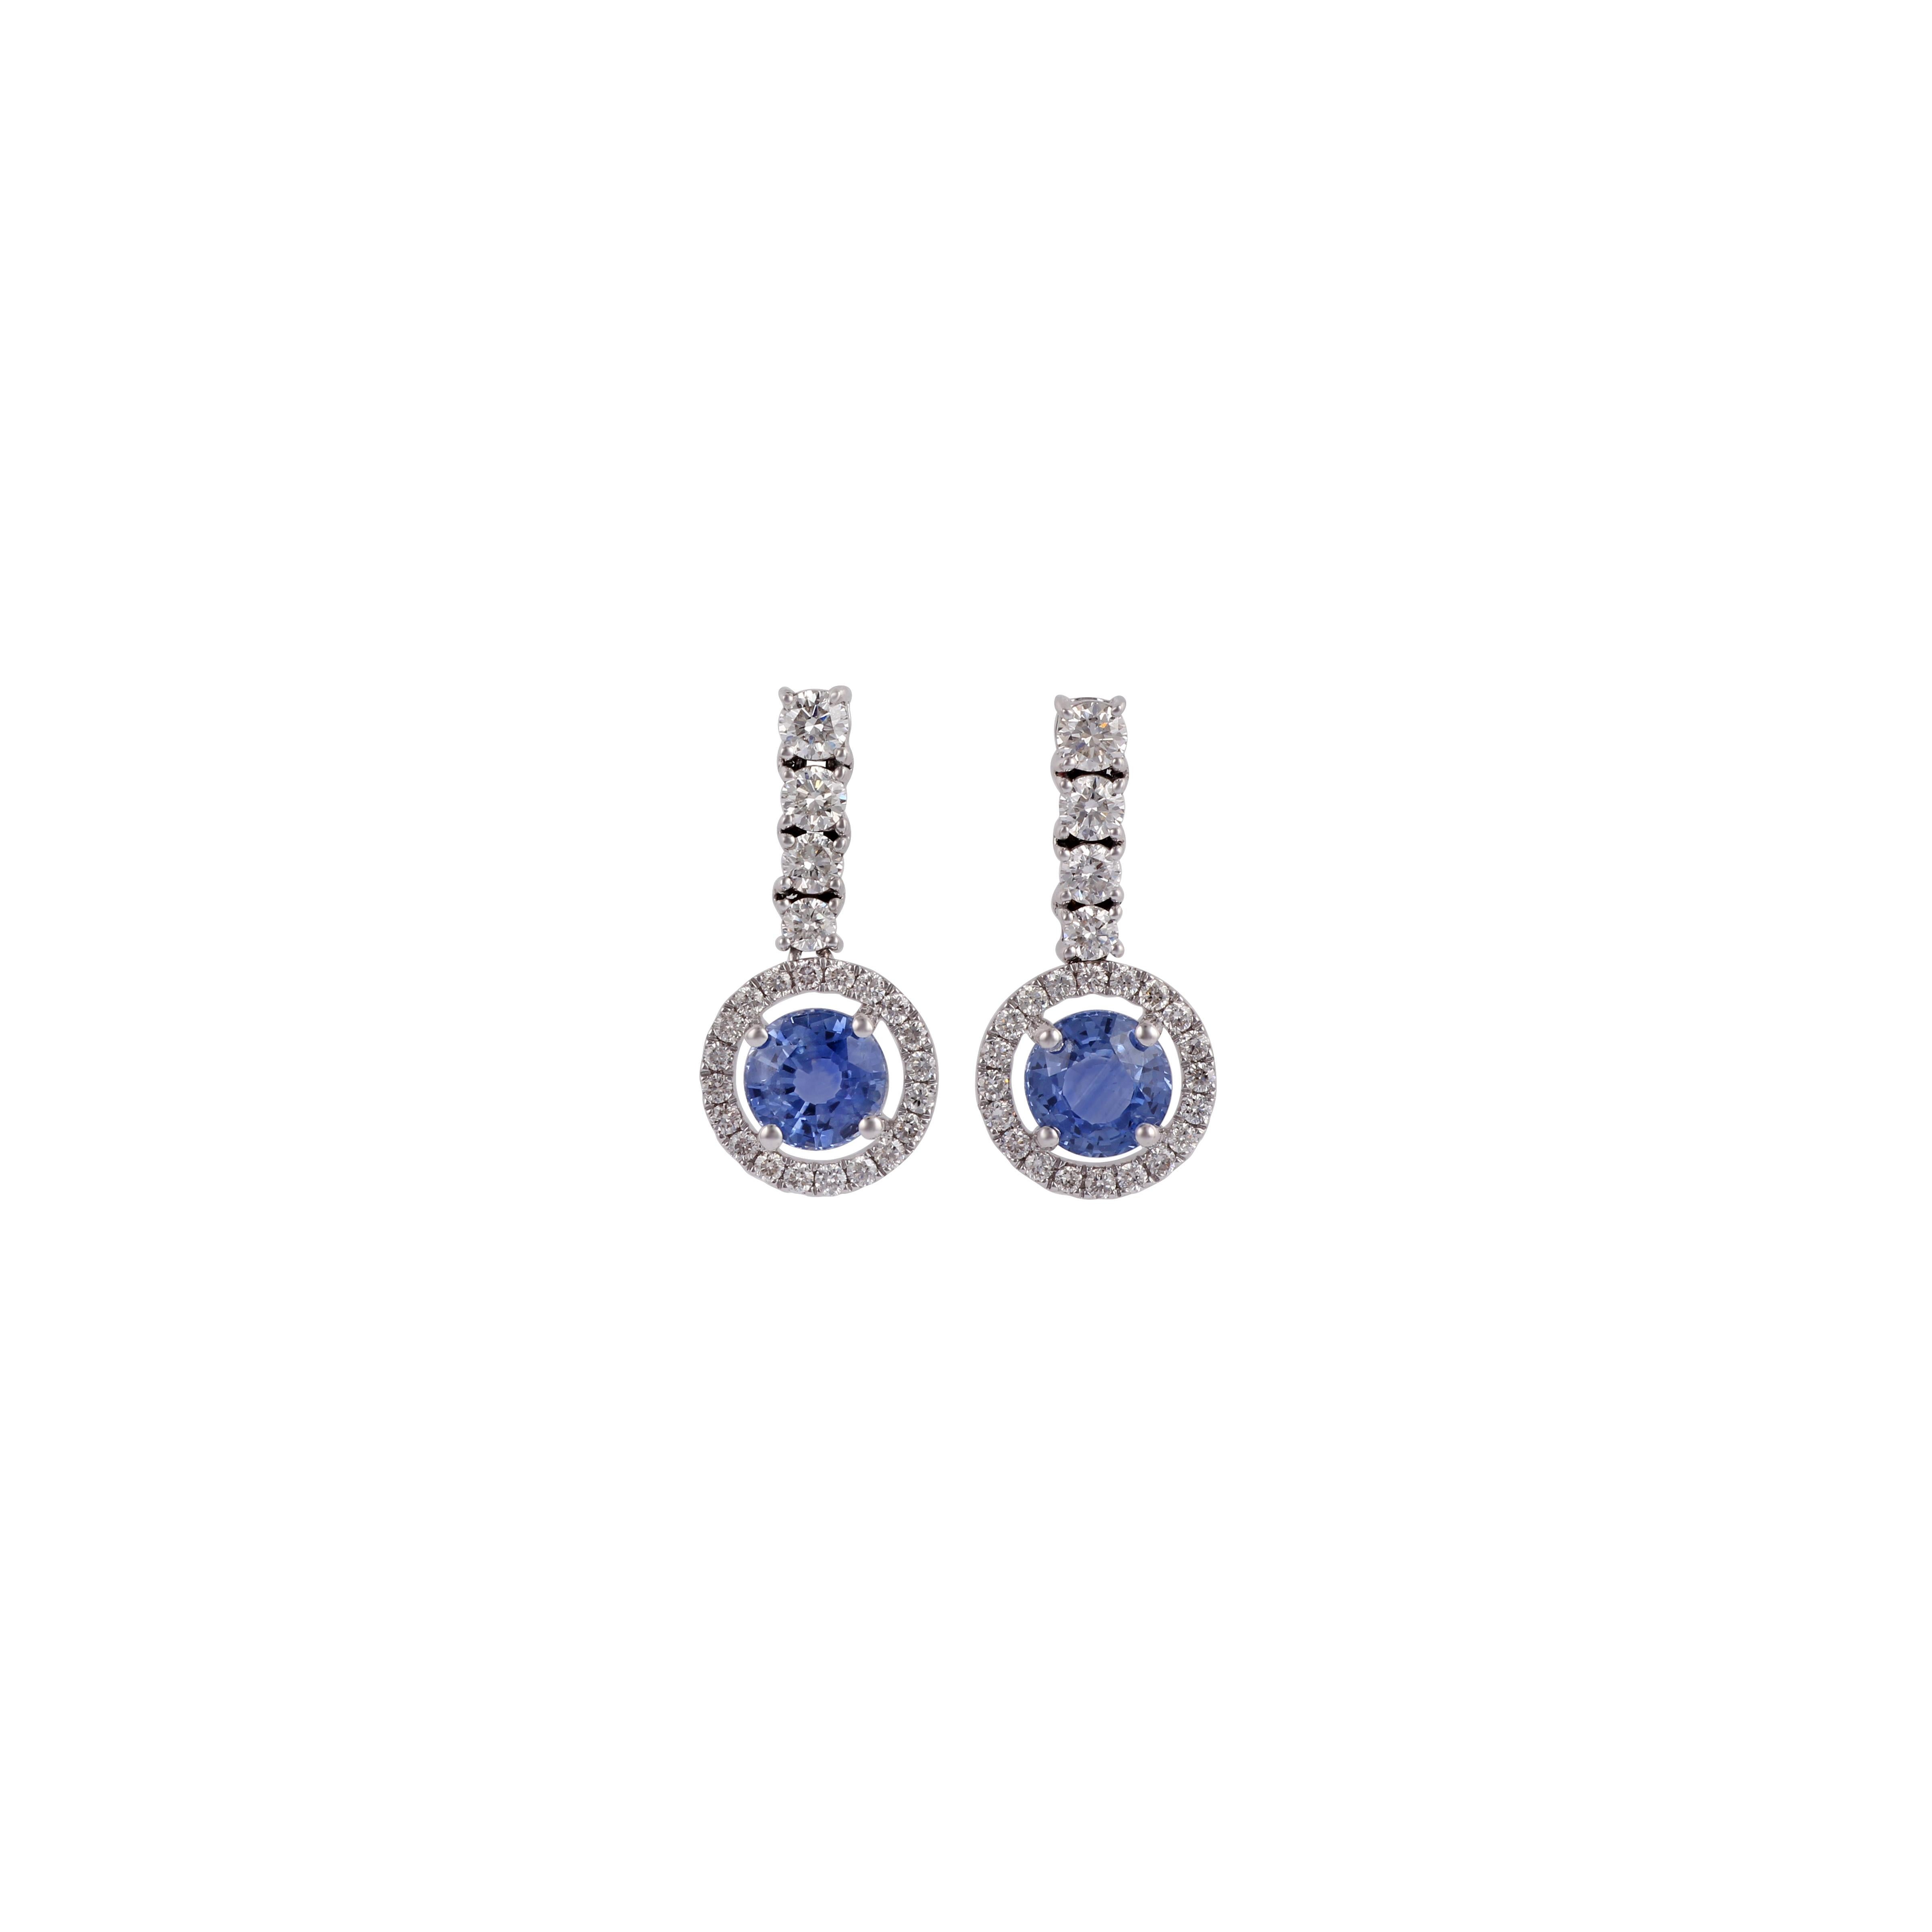 A stunning, fine and impressive pair of  1.96 carat blue sapphire & 0.74 Carat  Diamond with Solid 18k White Gold. 

Studs create a subtle beauty while showcasing the colors of the natural precious gemstones and illuminating diamonds making a